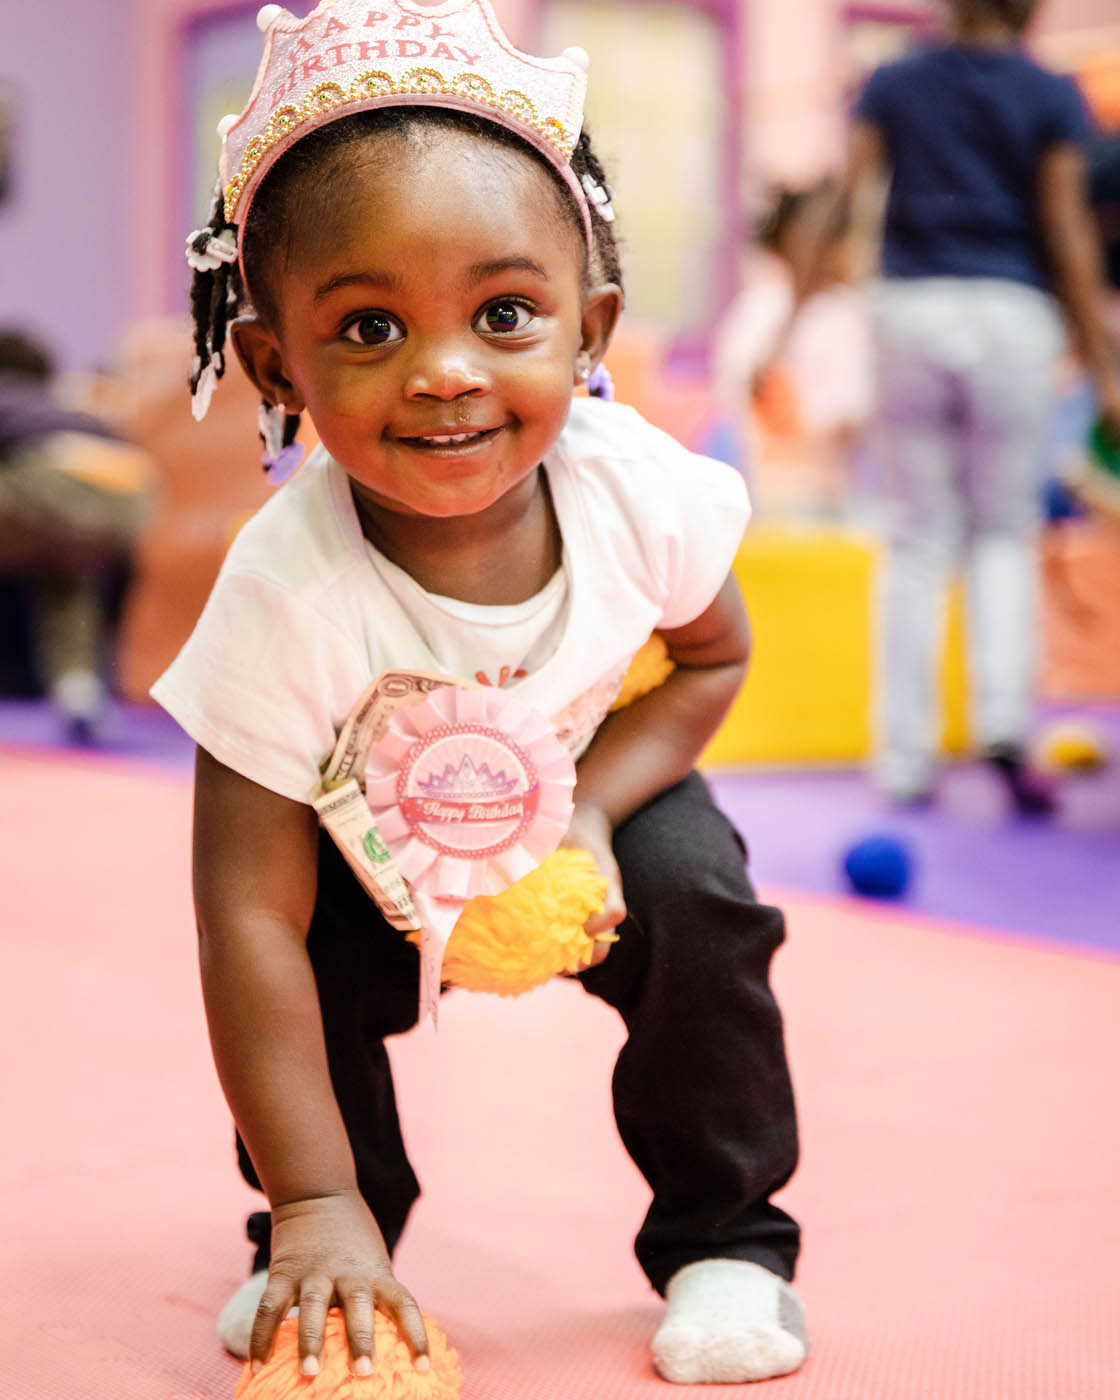 A toddler in a white shirt smiling at the camera, contact us today for toddler activities in Pittsburgh.